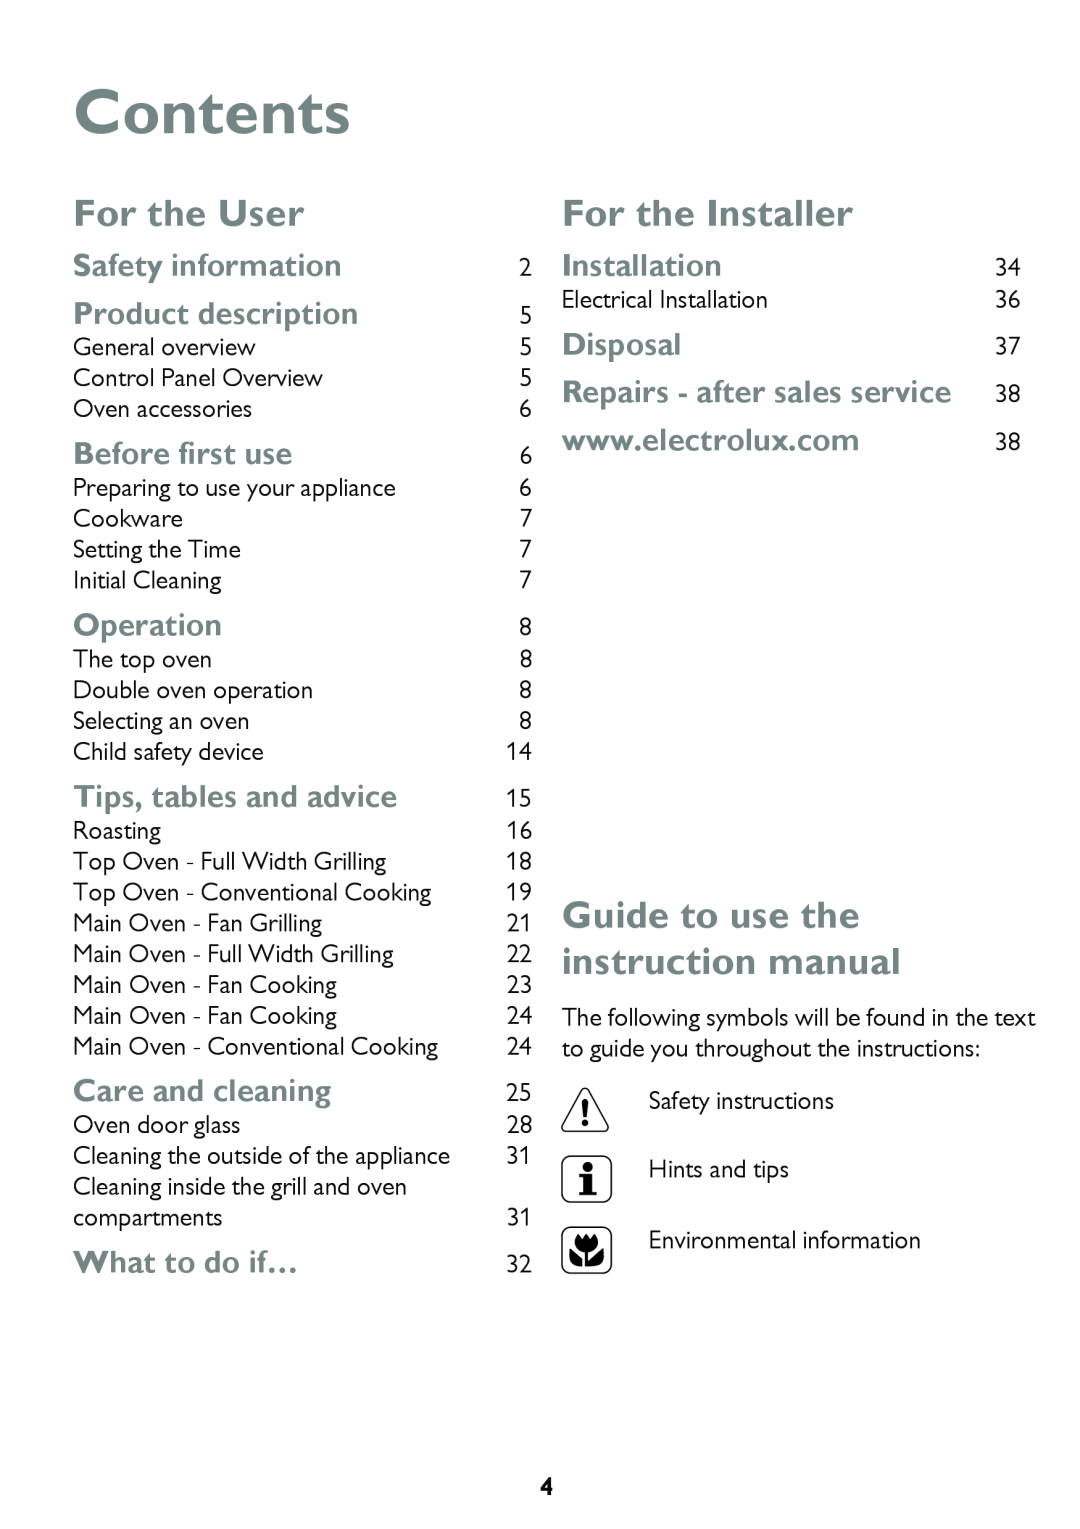 John Lewis JLBIDO913 instruction manual Contents, For the User, For the Installer 